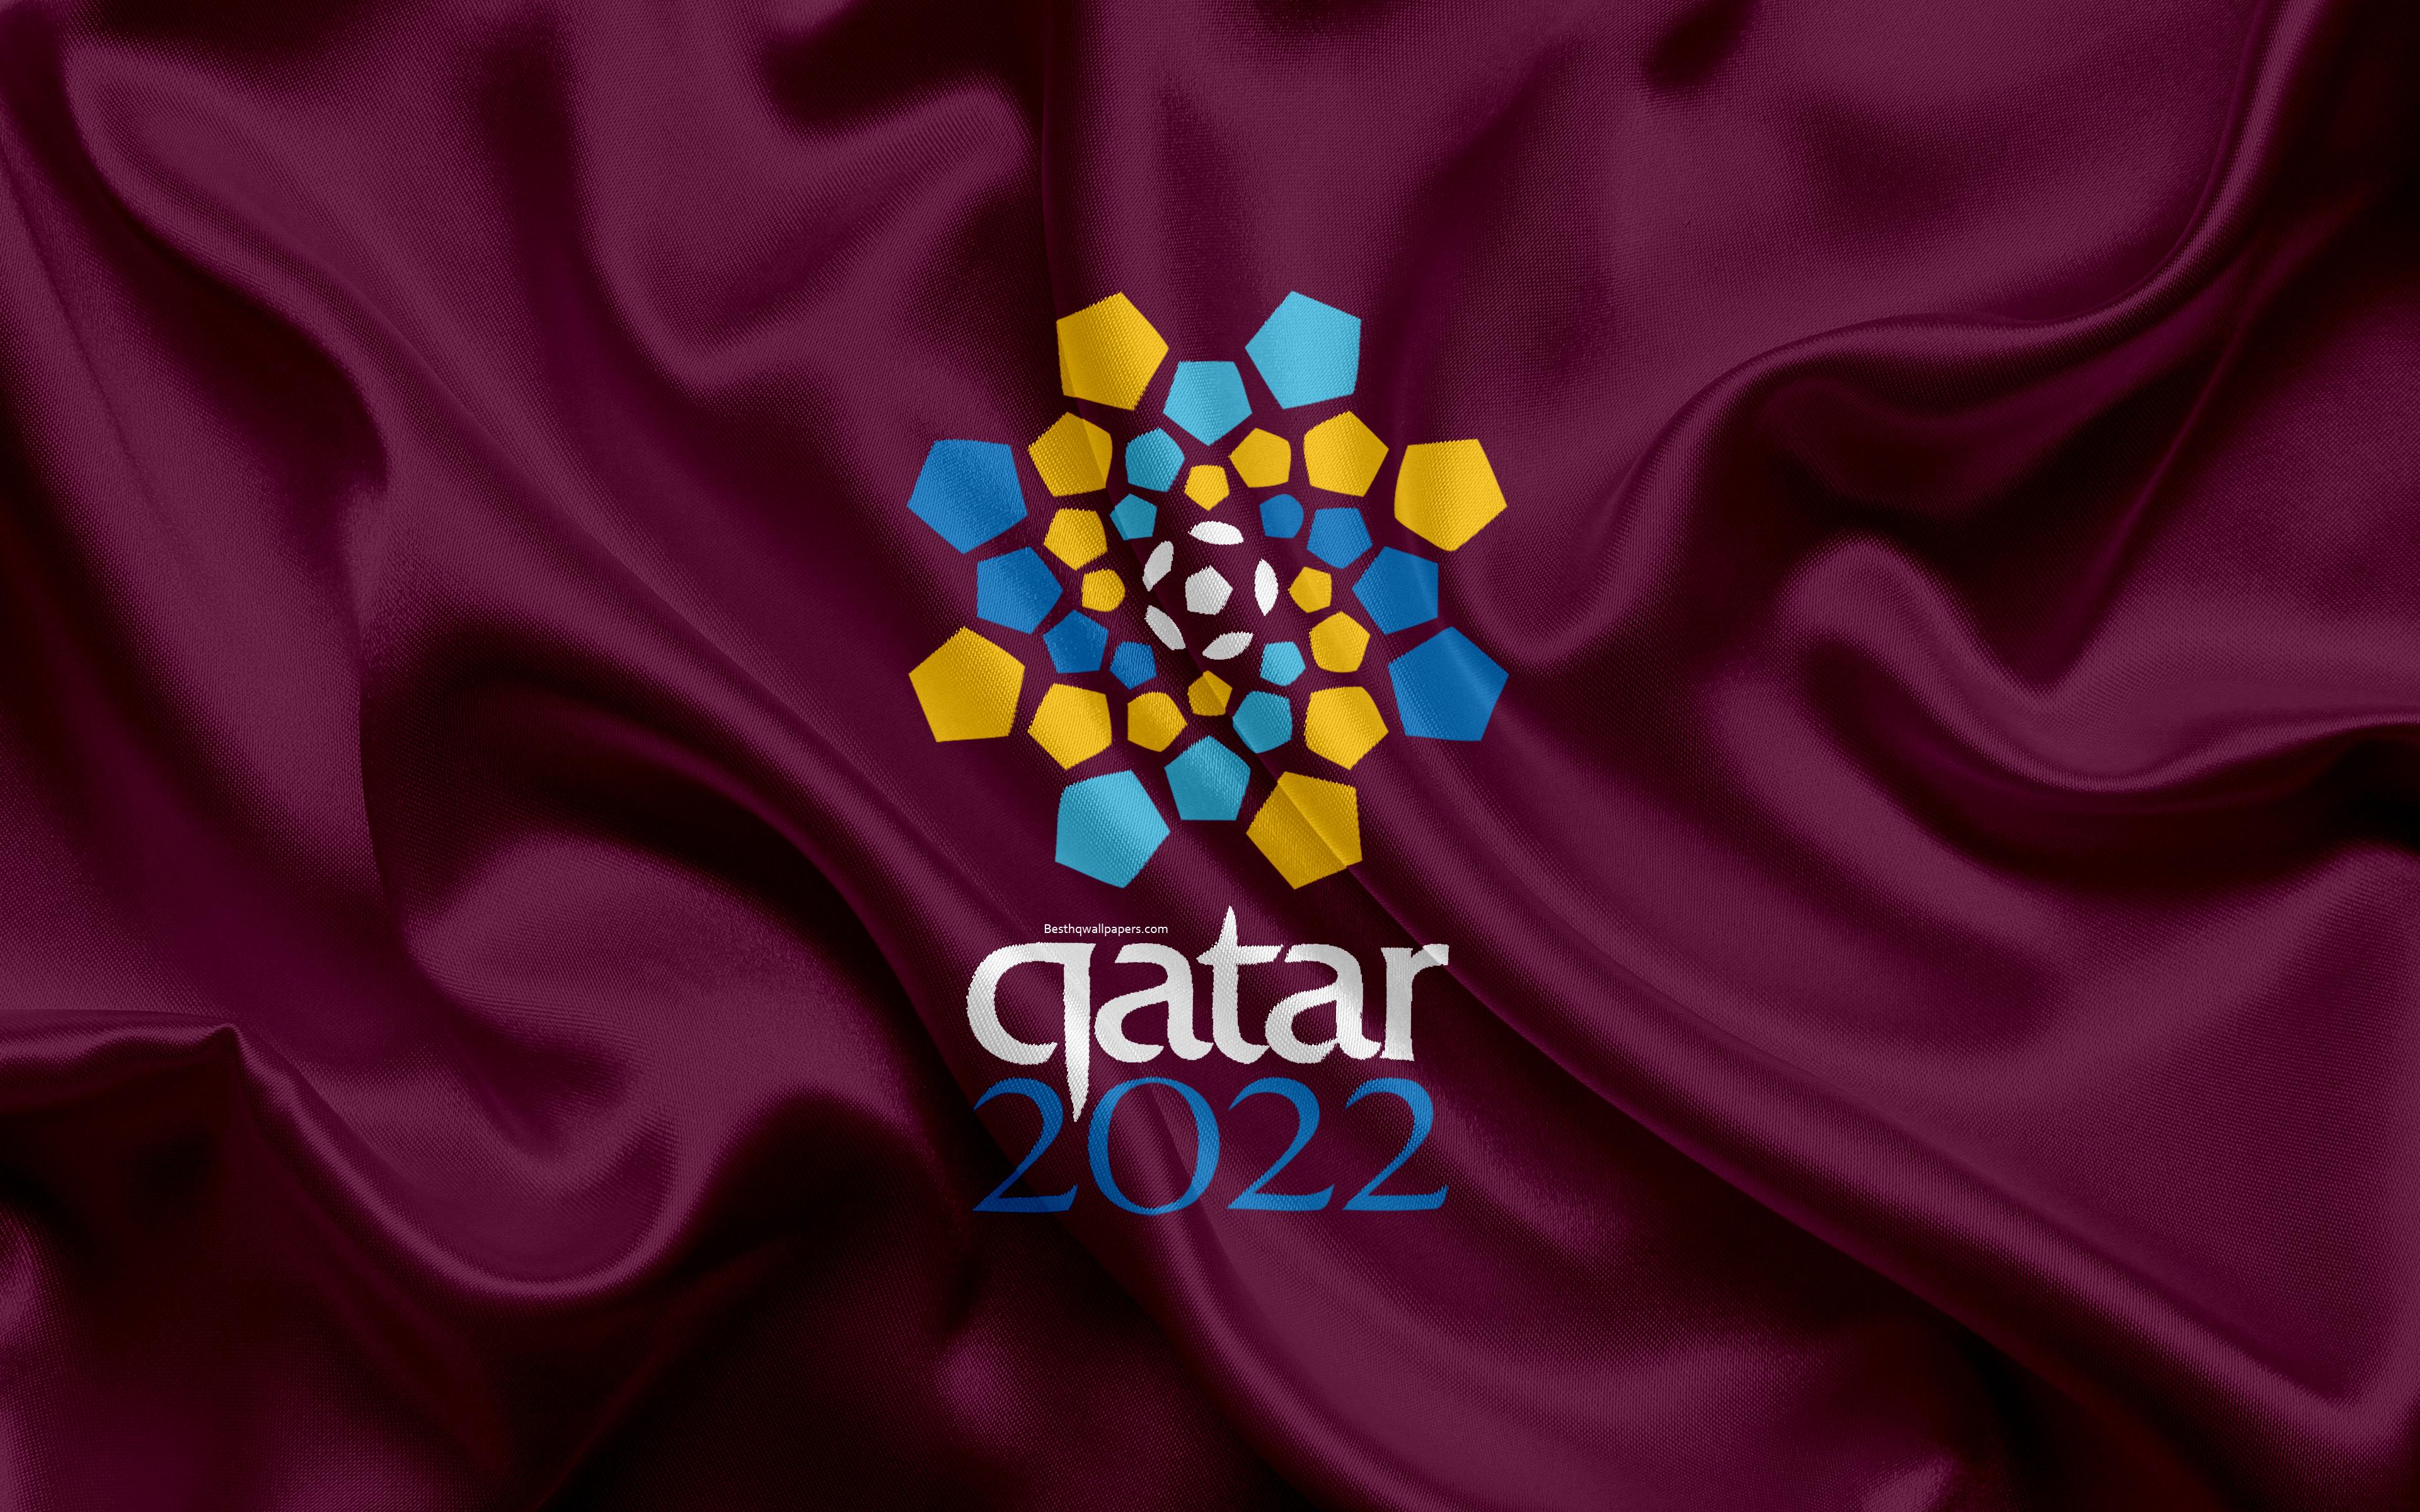 World Cup Qatar 2022 Wallpapers Top Free World Cup Qatar 2022 Backgrounds Wallpaperaccess 5025